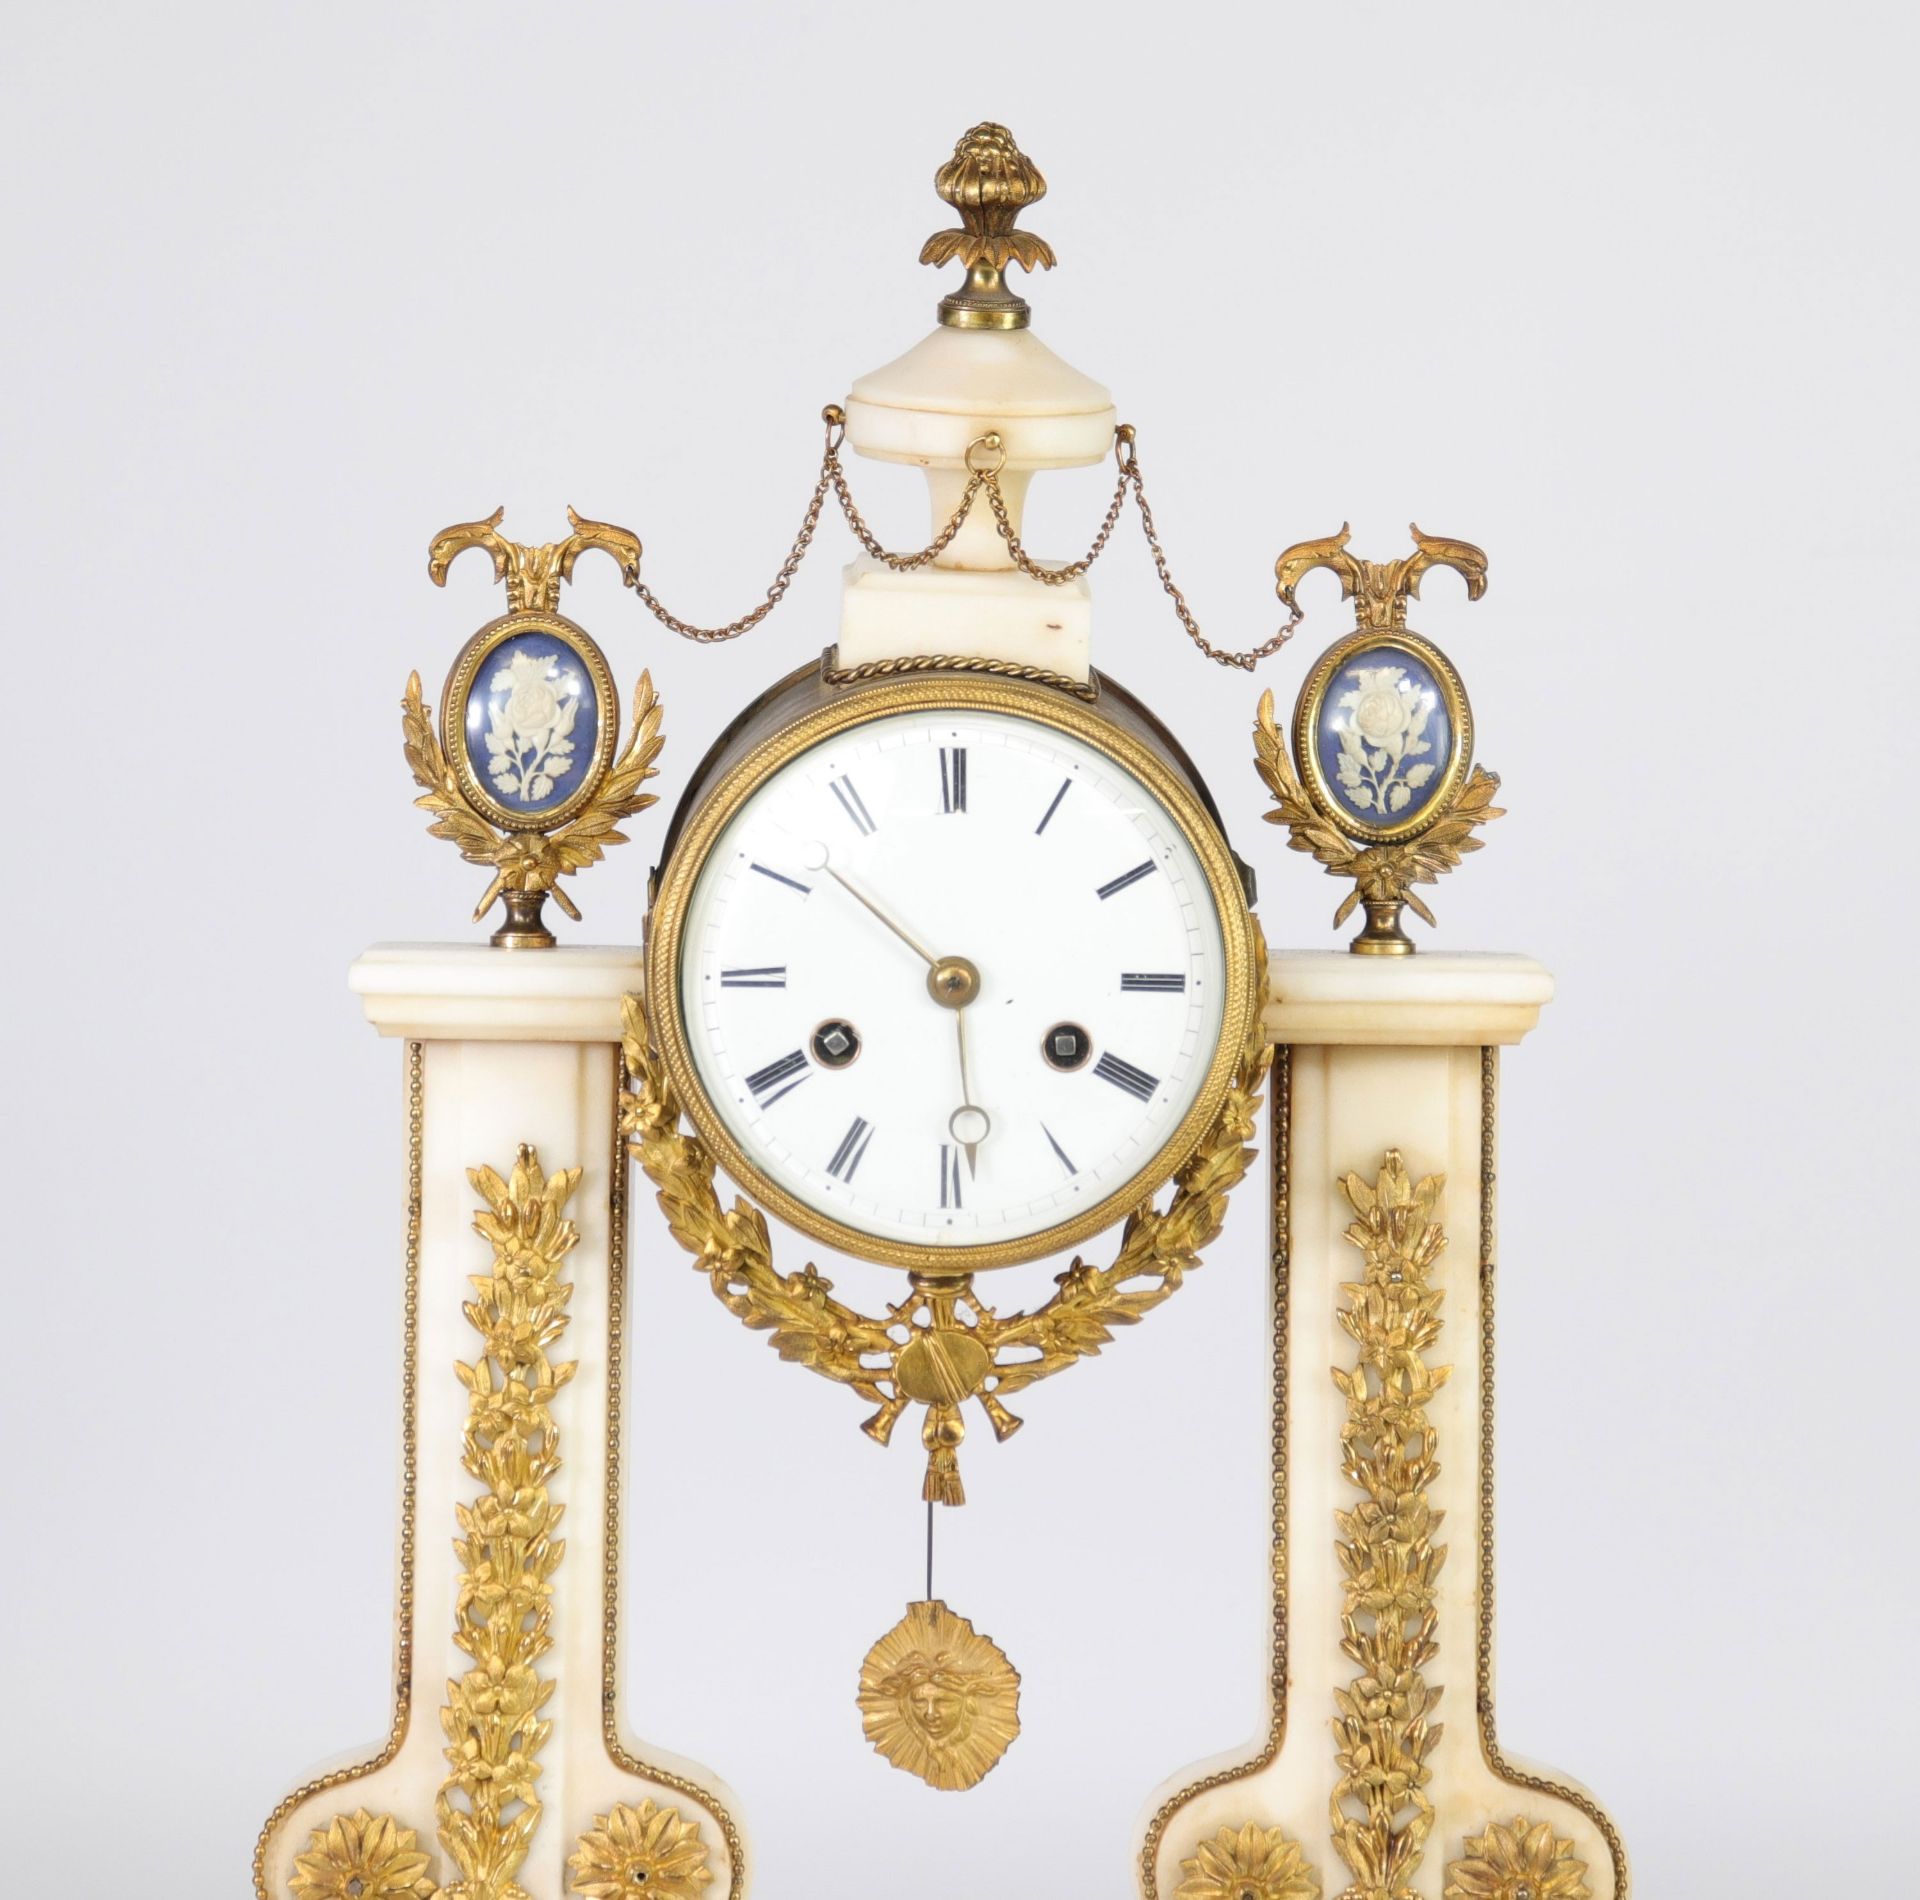 Louis XVI portico clock in white marble and bronze - Image 2 of 3